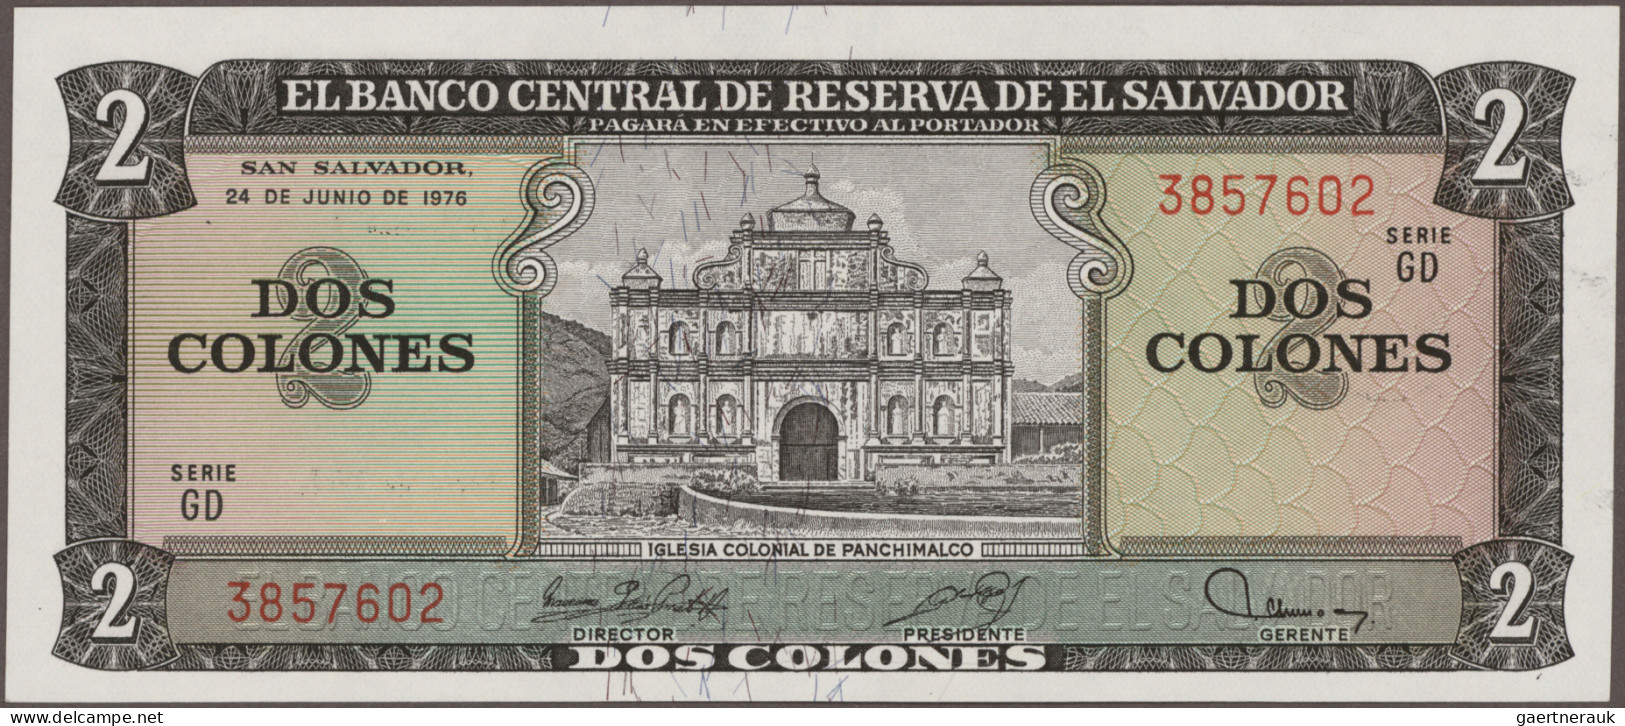 Worldwide: Very nice collection of more than 690 banknotes from all over the wor